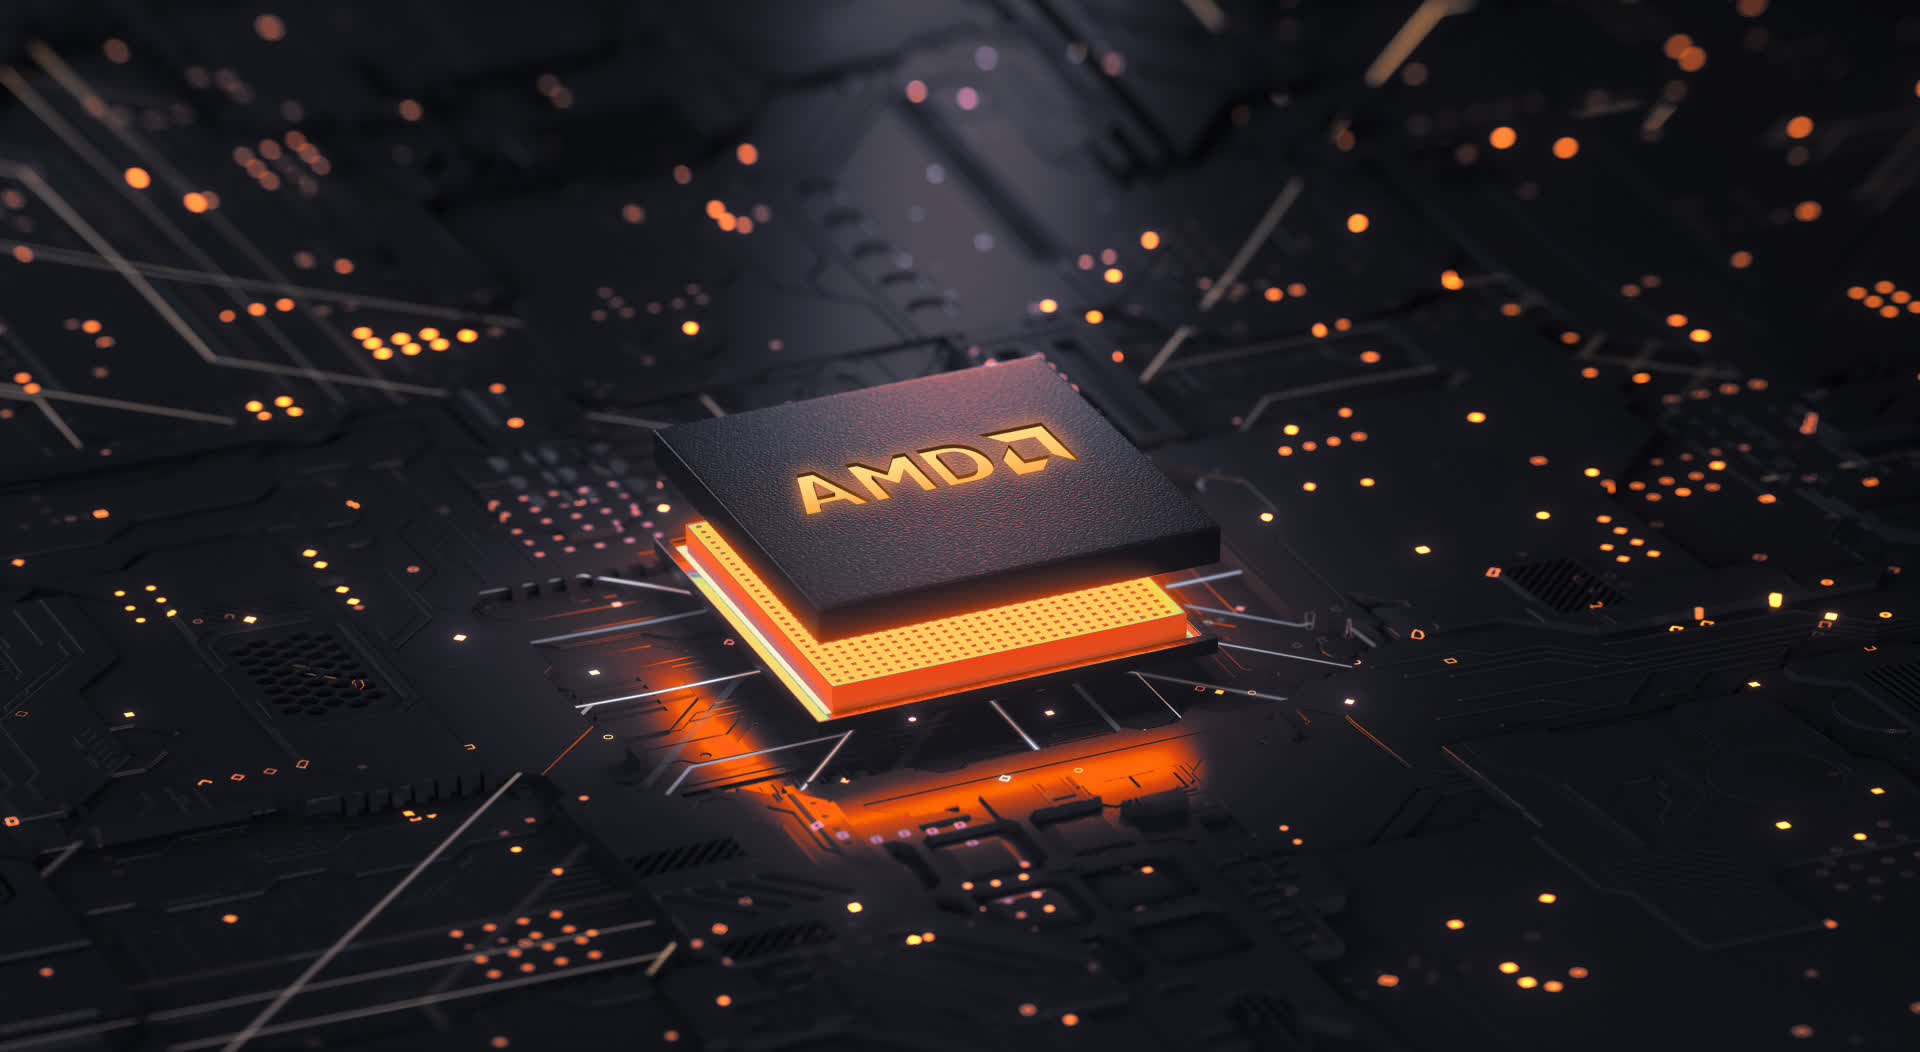 AMD will prioritize high-end CPUs and GPUs for desktop and notebook markets